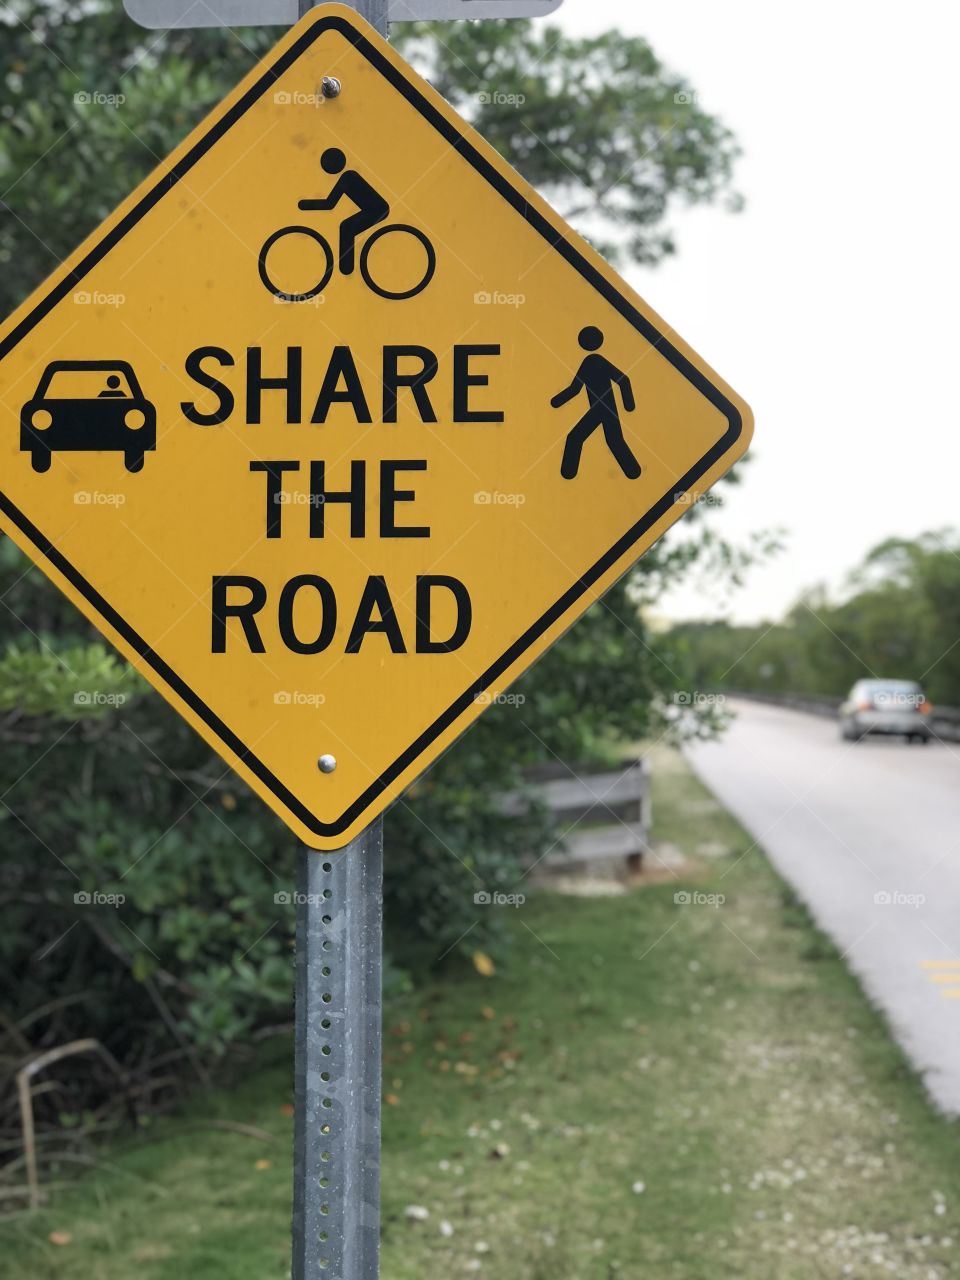 Share the road with everyone 